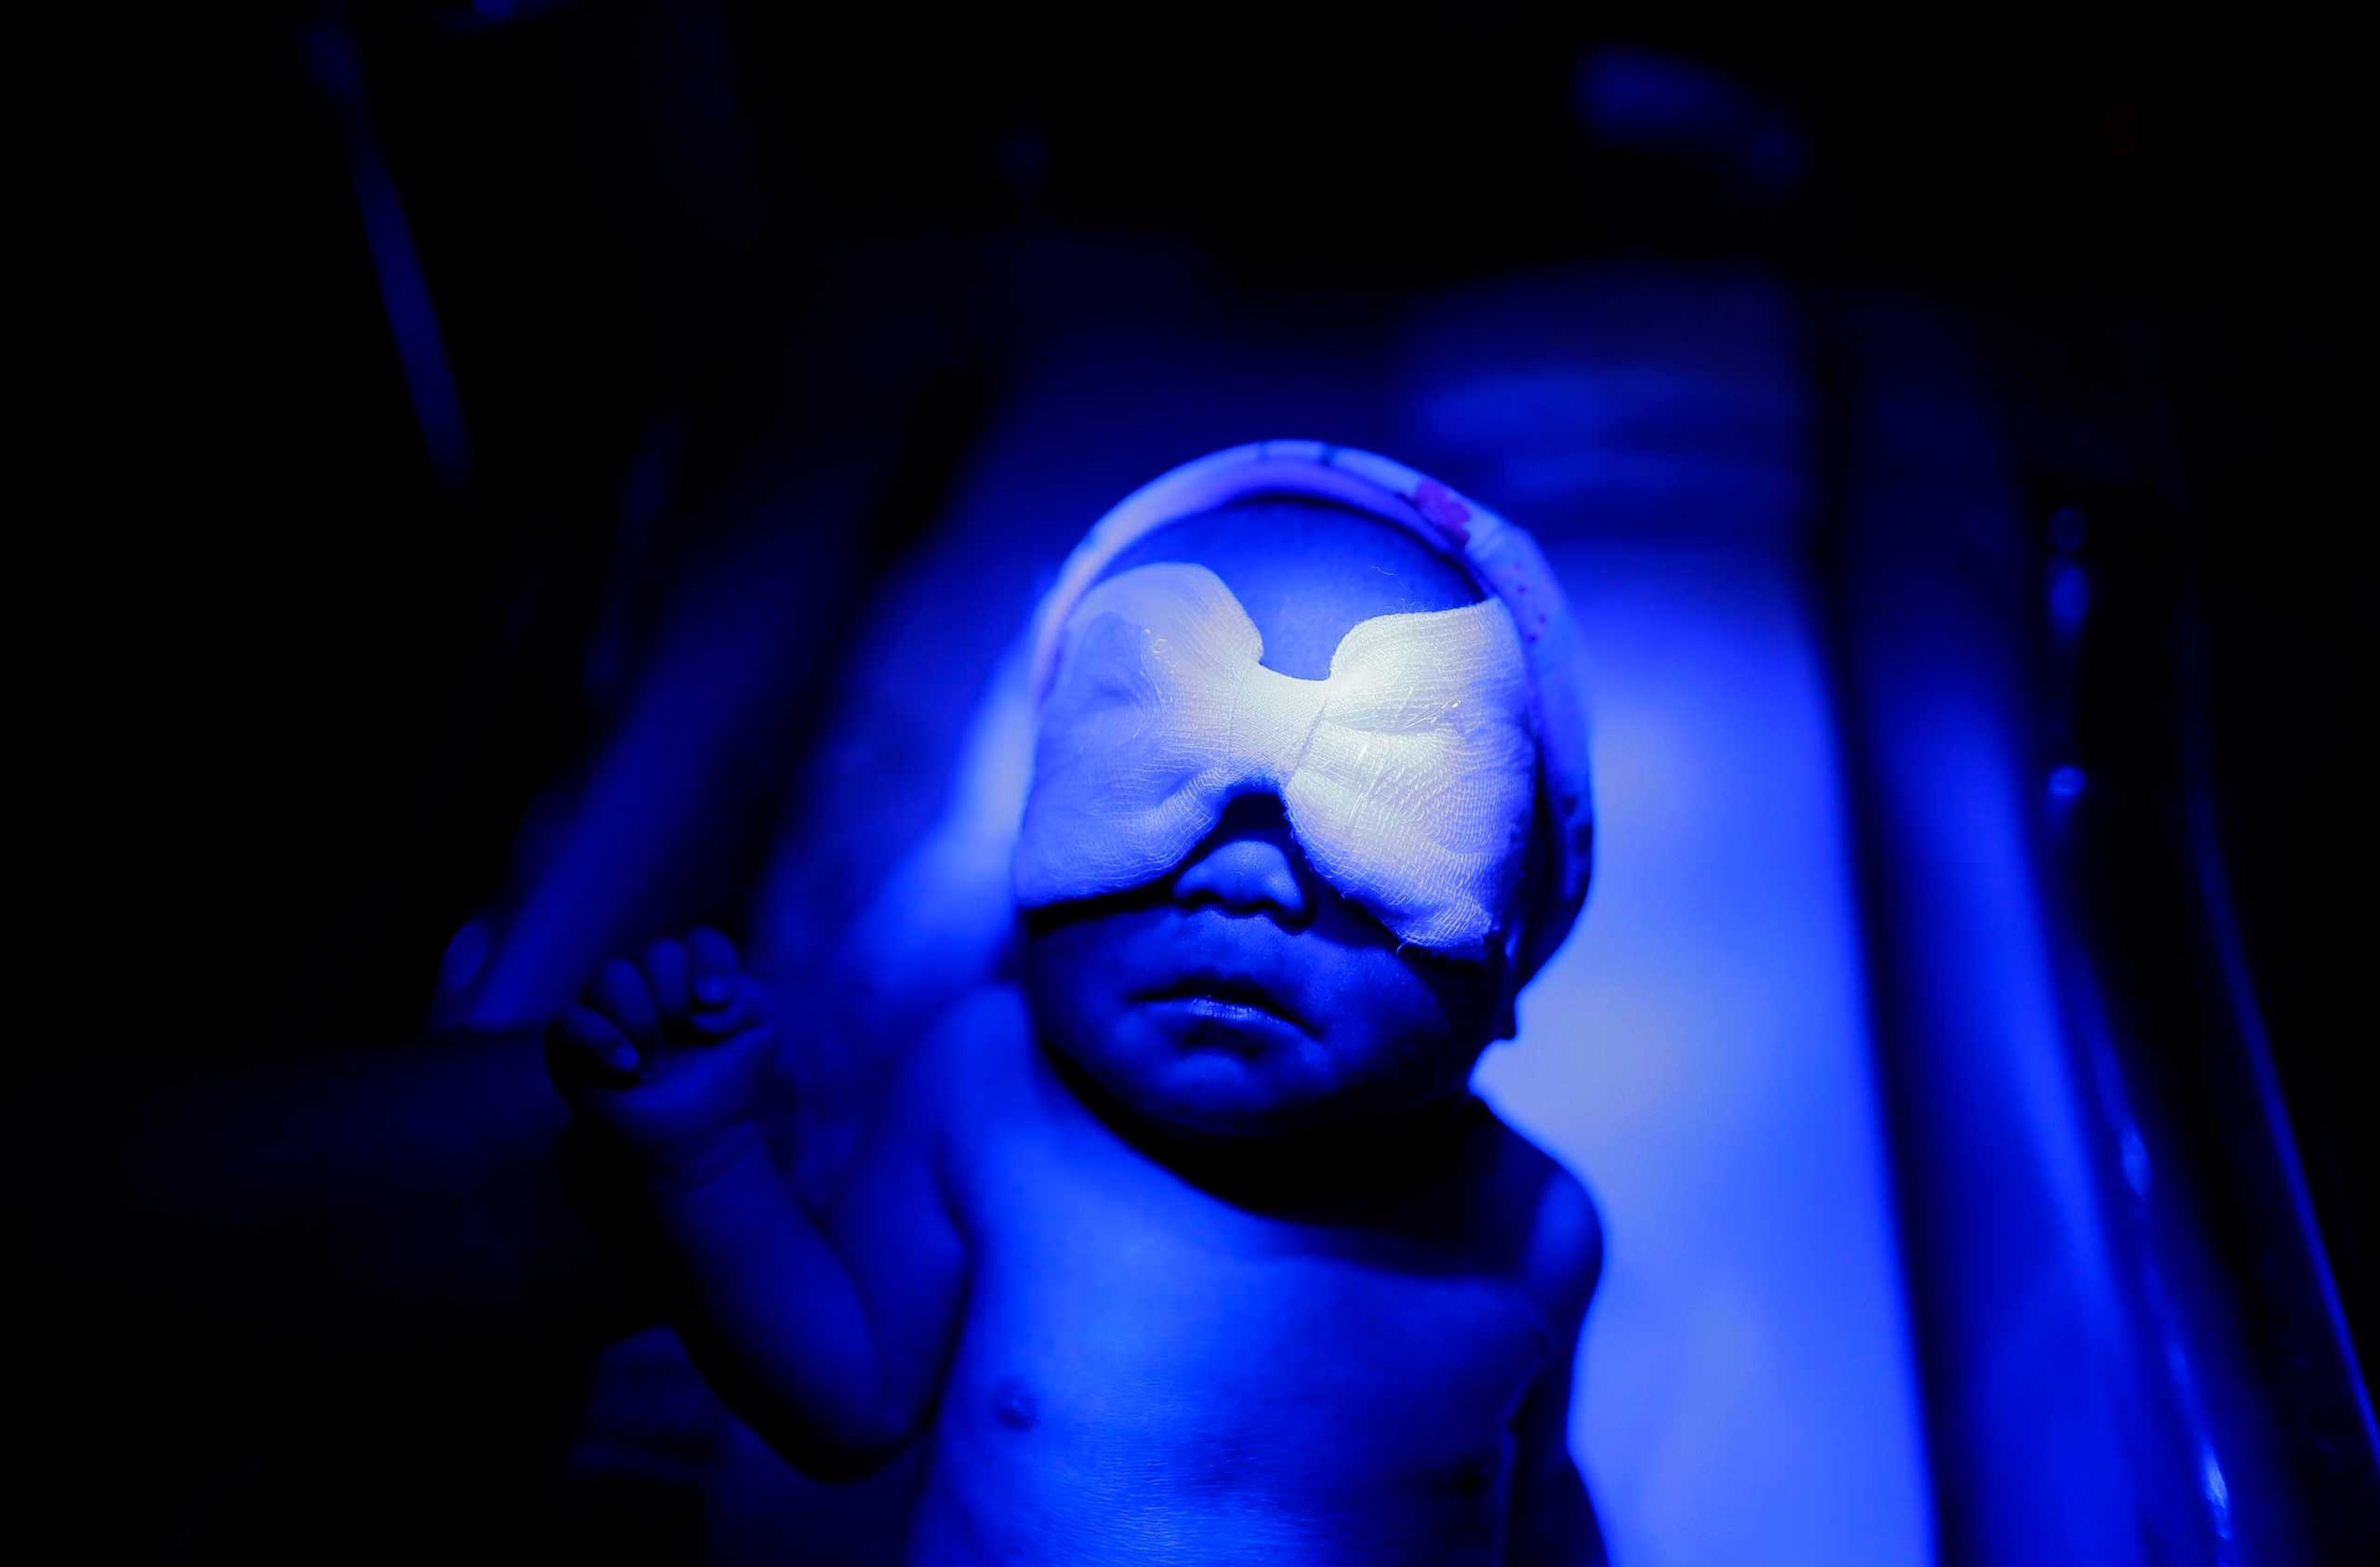 Nov. 6, 2014. Newborn Nisso Rada during a phototherapy session at the Neonatal Intensive Care Unit in the Eastern Visayas Regional Medical Center, which was damaged by the 2013 Typhoon Haiyan in Tacloban City, Leyte province, Philippines,